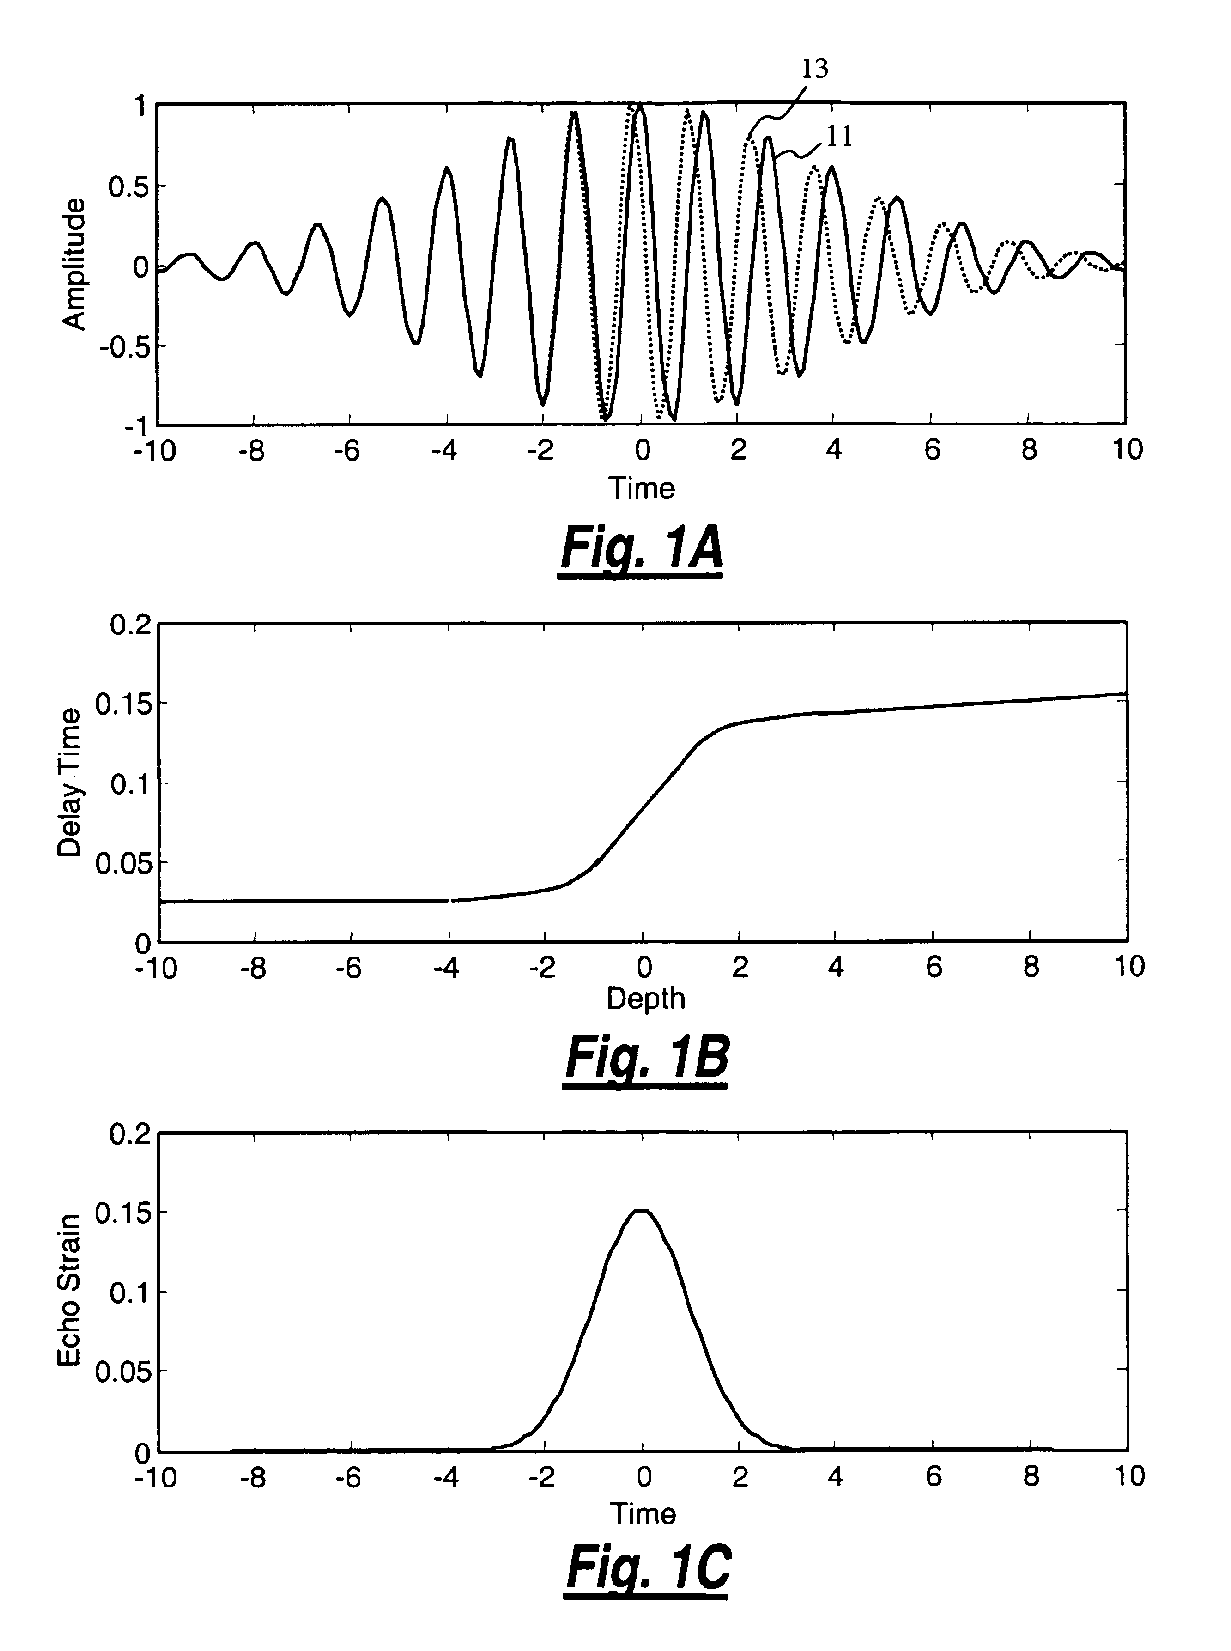 Method for mapping temperature rise using pulse-echo ultrasound